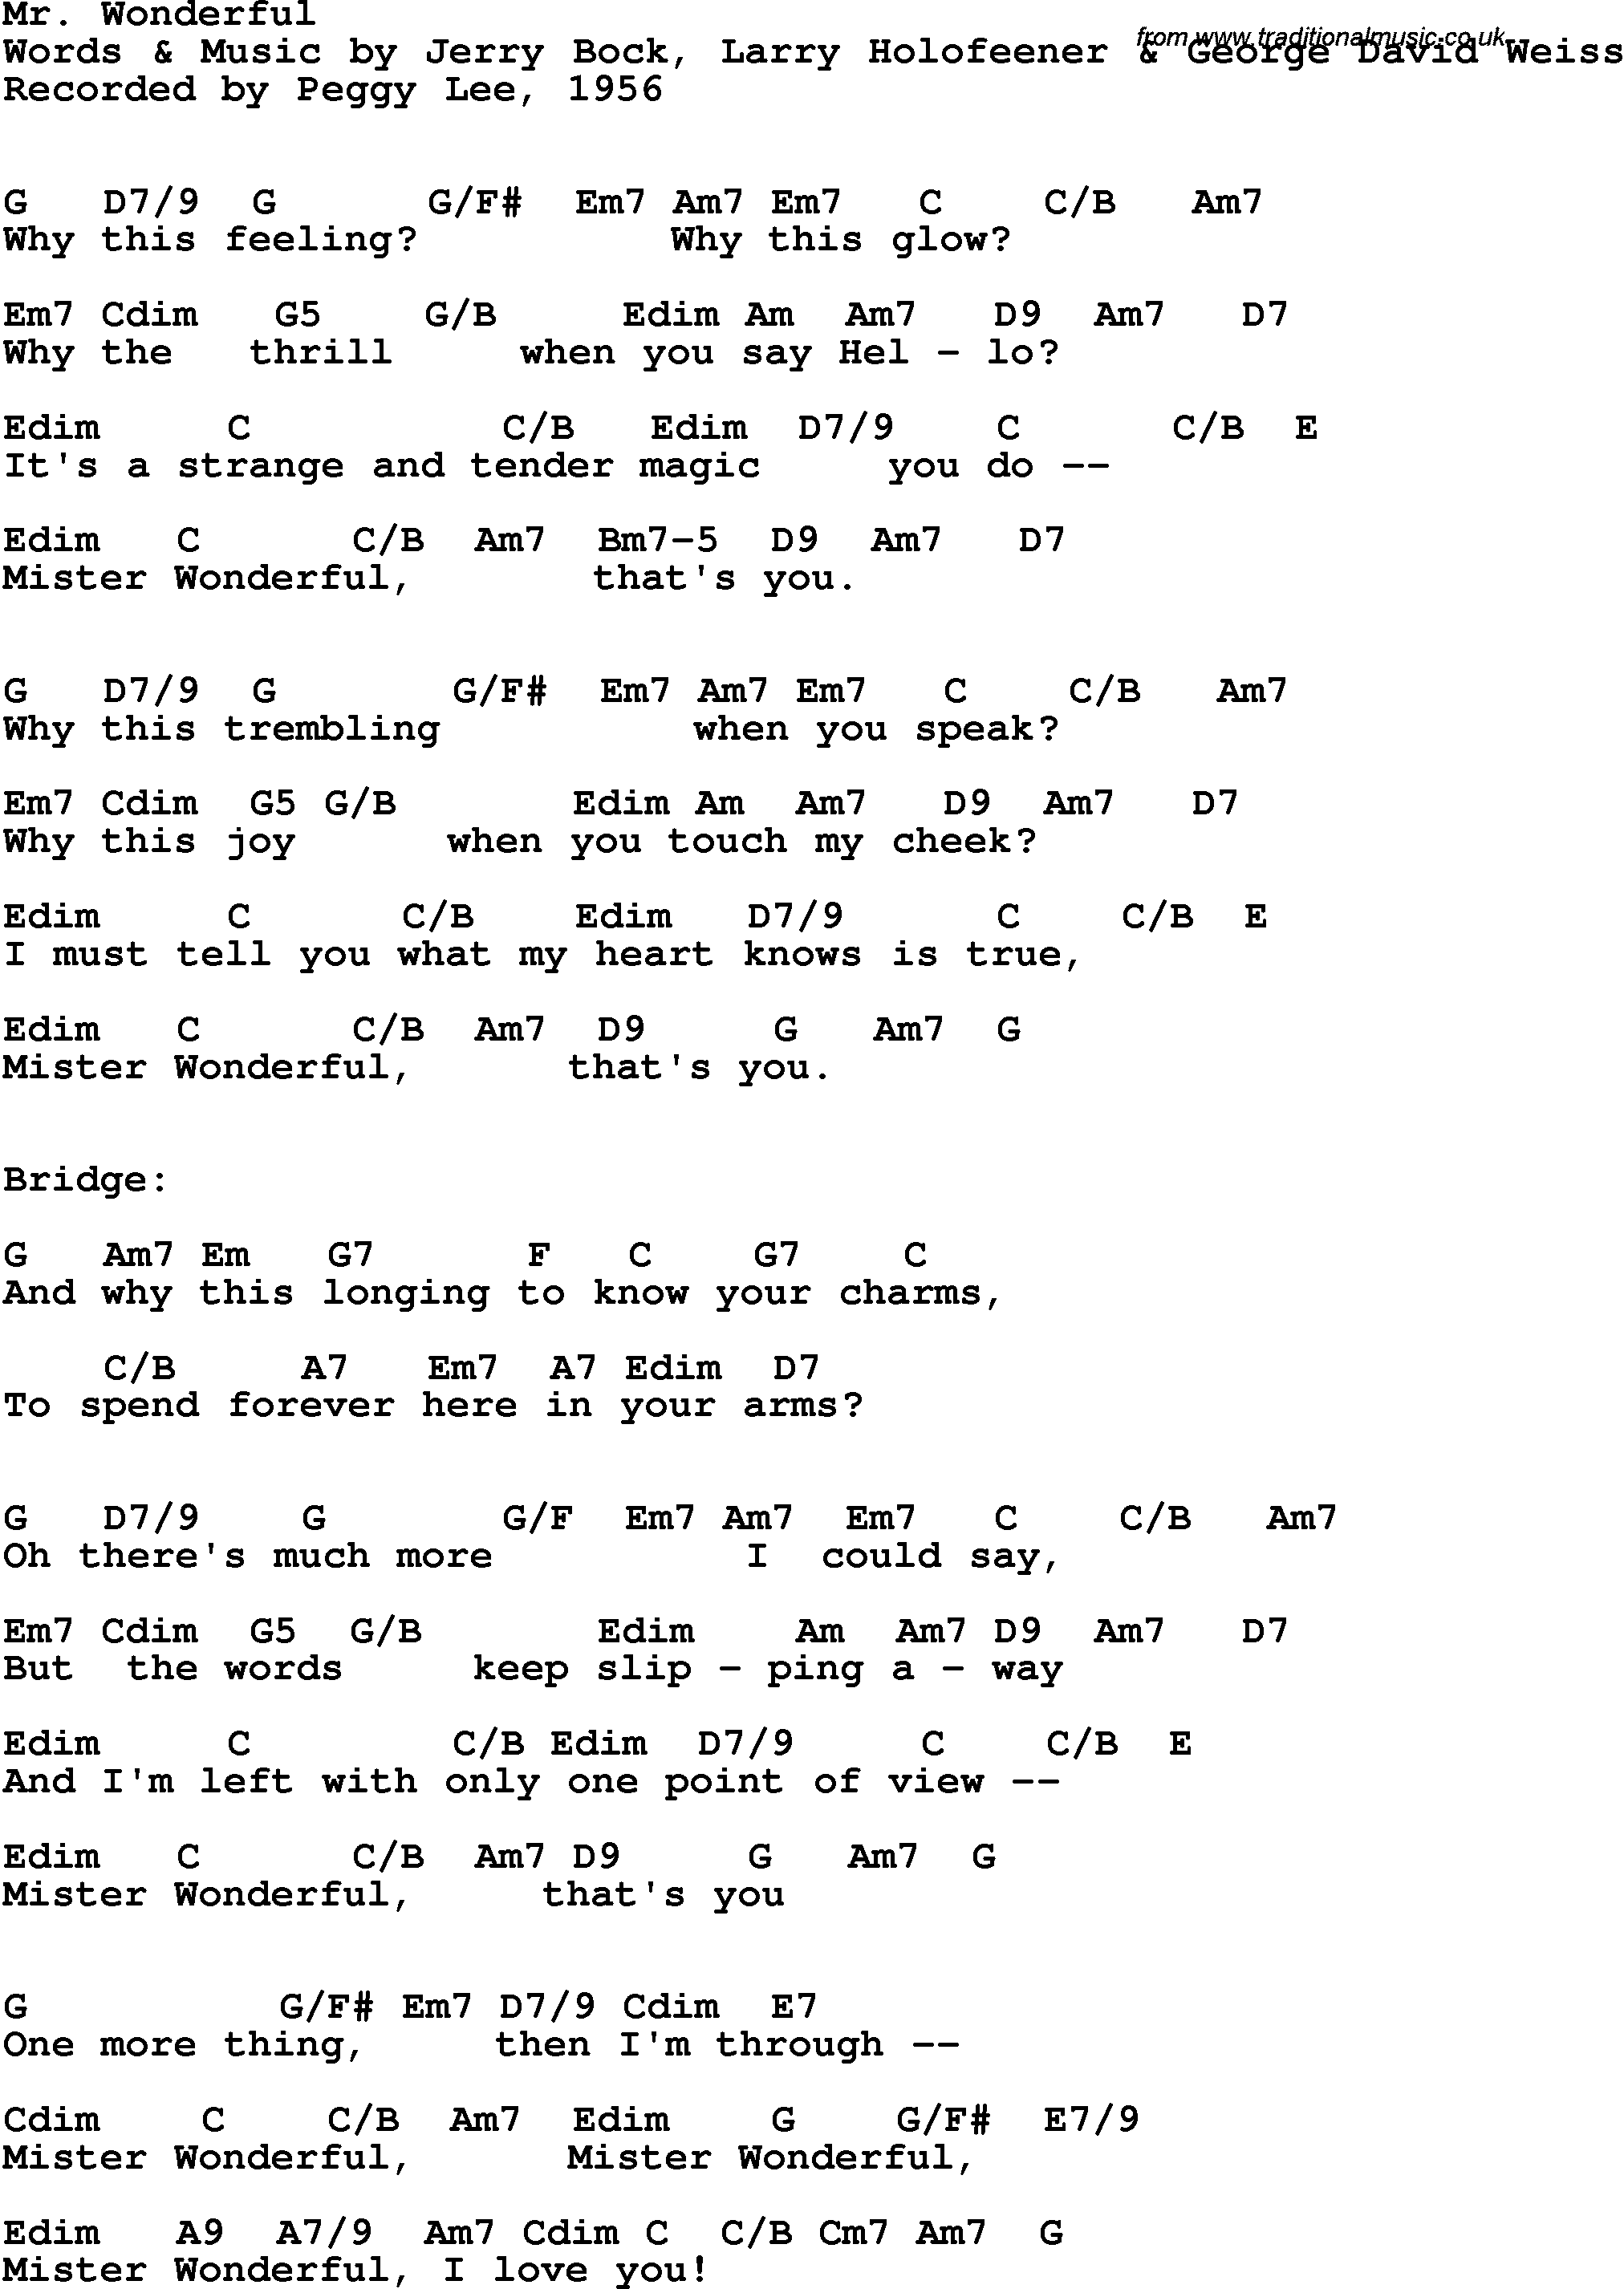 Song Lyrics with guitar chords for Mr Wonderful - Peggy Lee, 1956